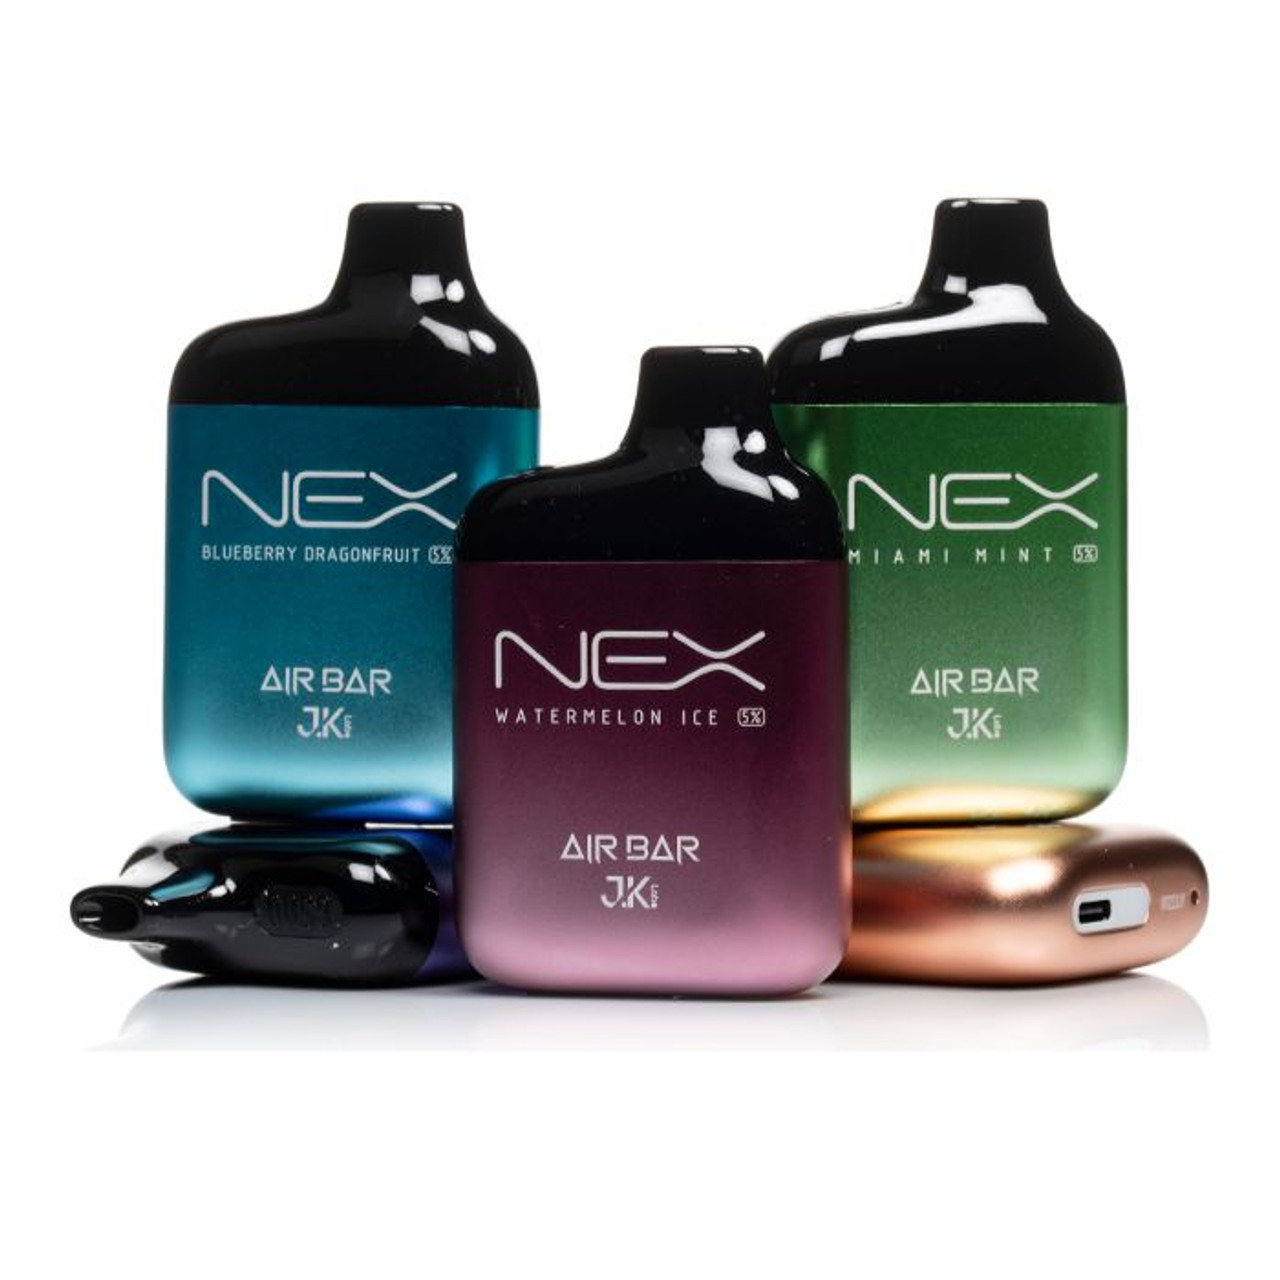 Satisfy Your Cravings with Air Bar Nex Vapes